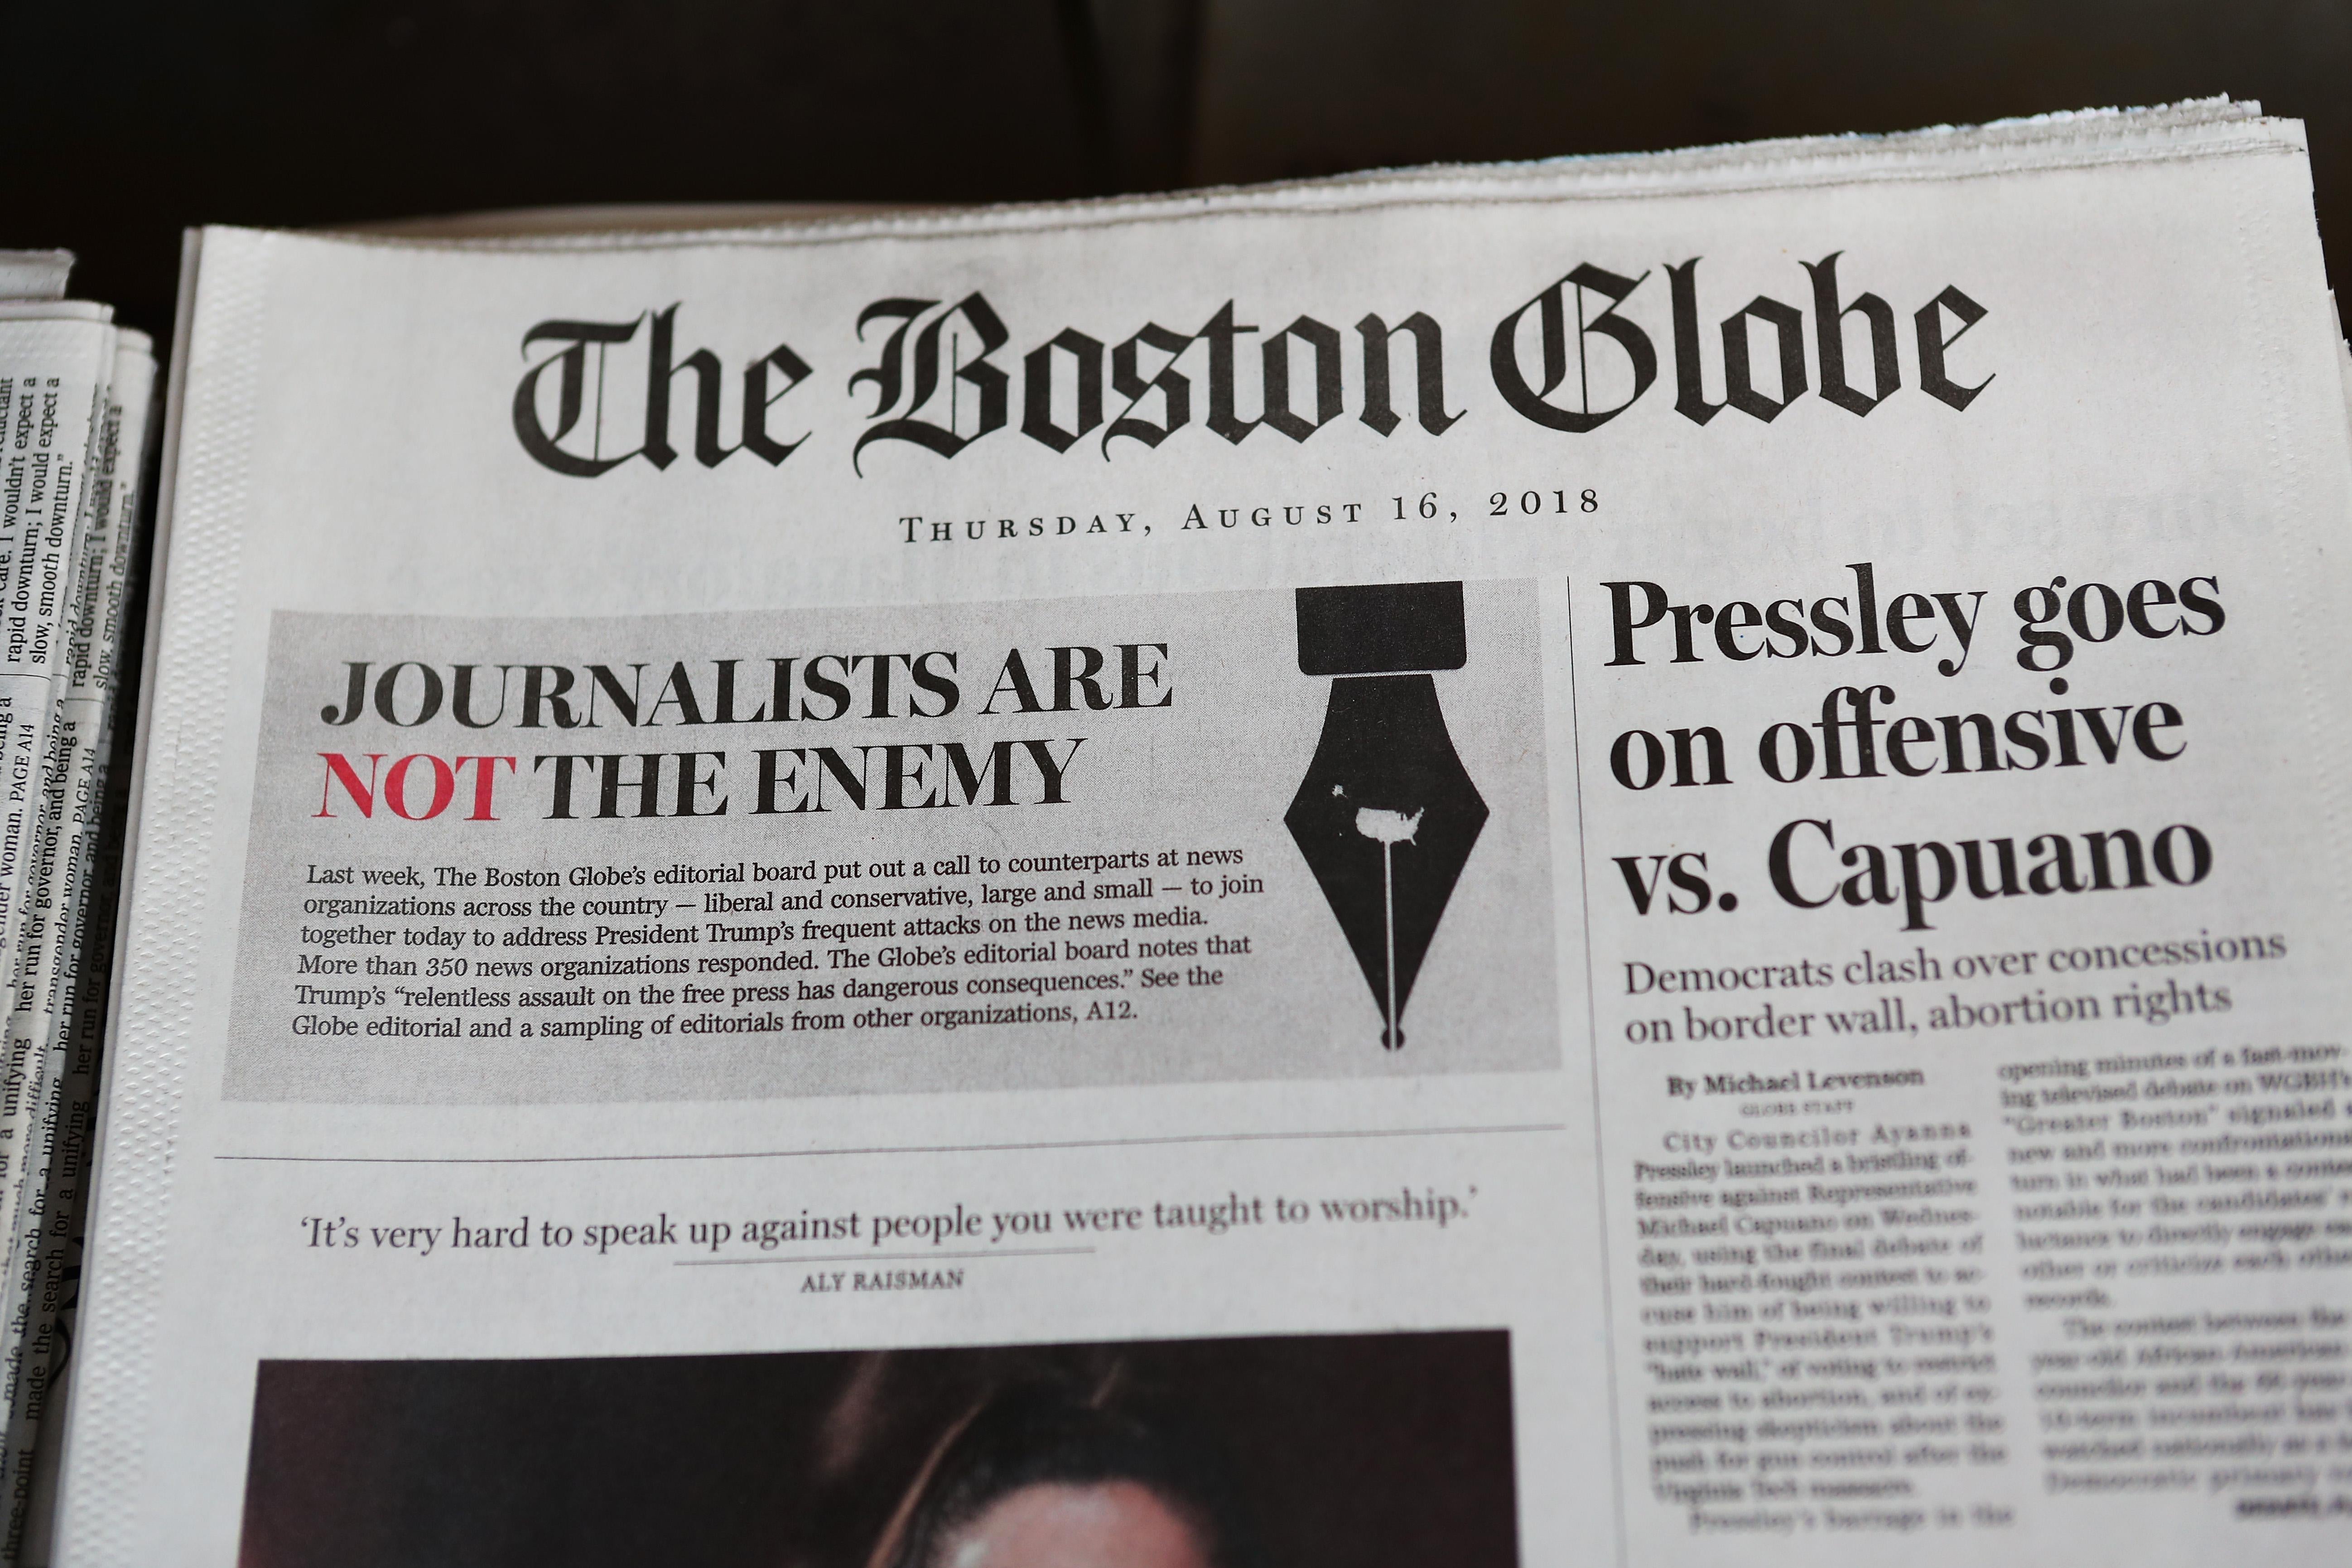 The front page of the Aug. 16 edition of the Boston Globe.